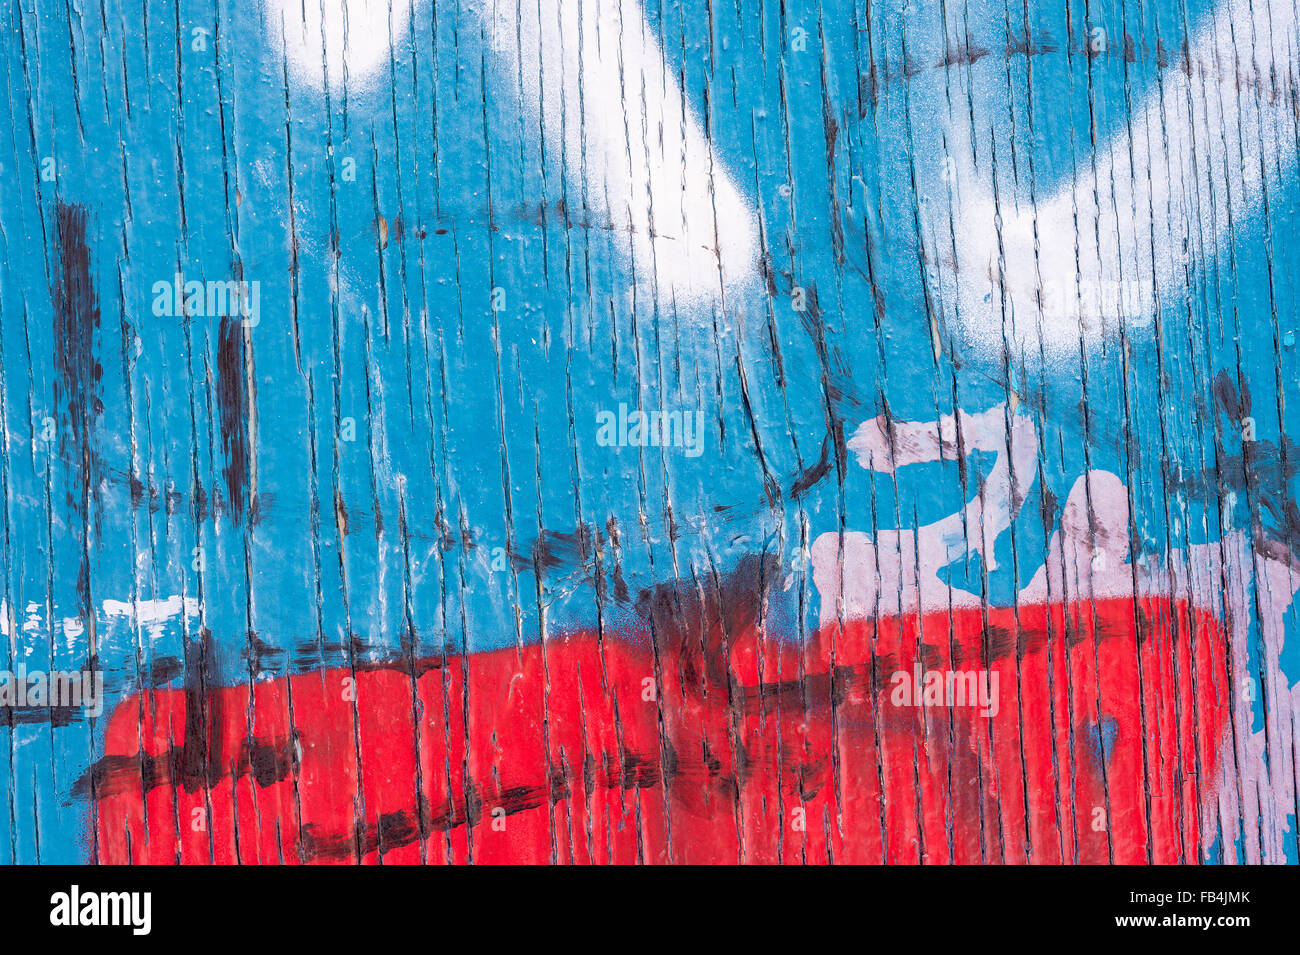 Vertical Lines of Peeling blue paint on wooden wall, with red and white spray paint markings Stock Photo